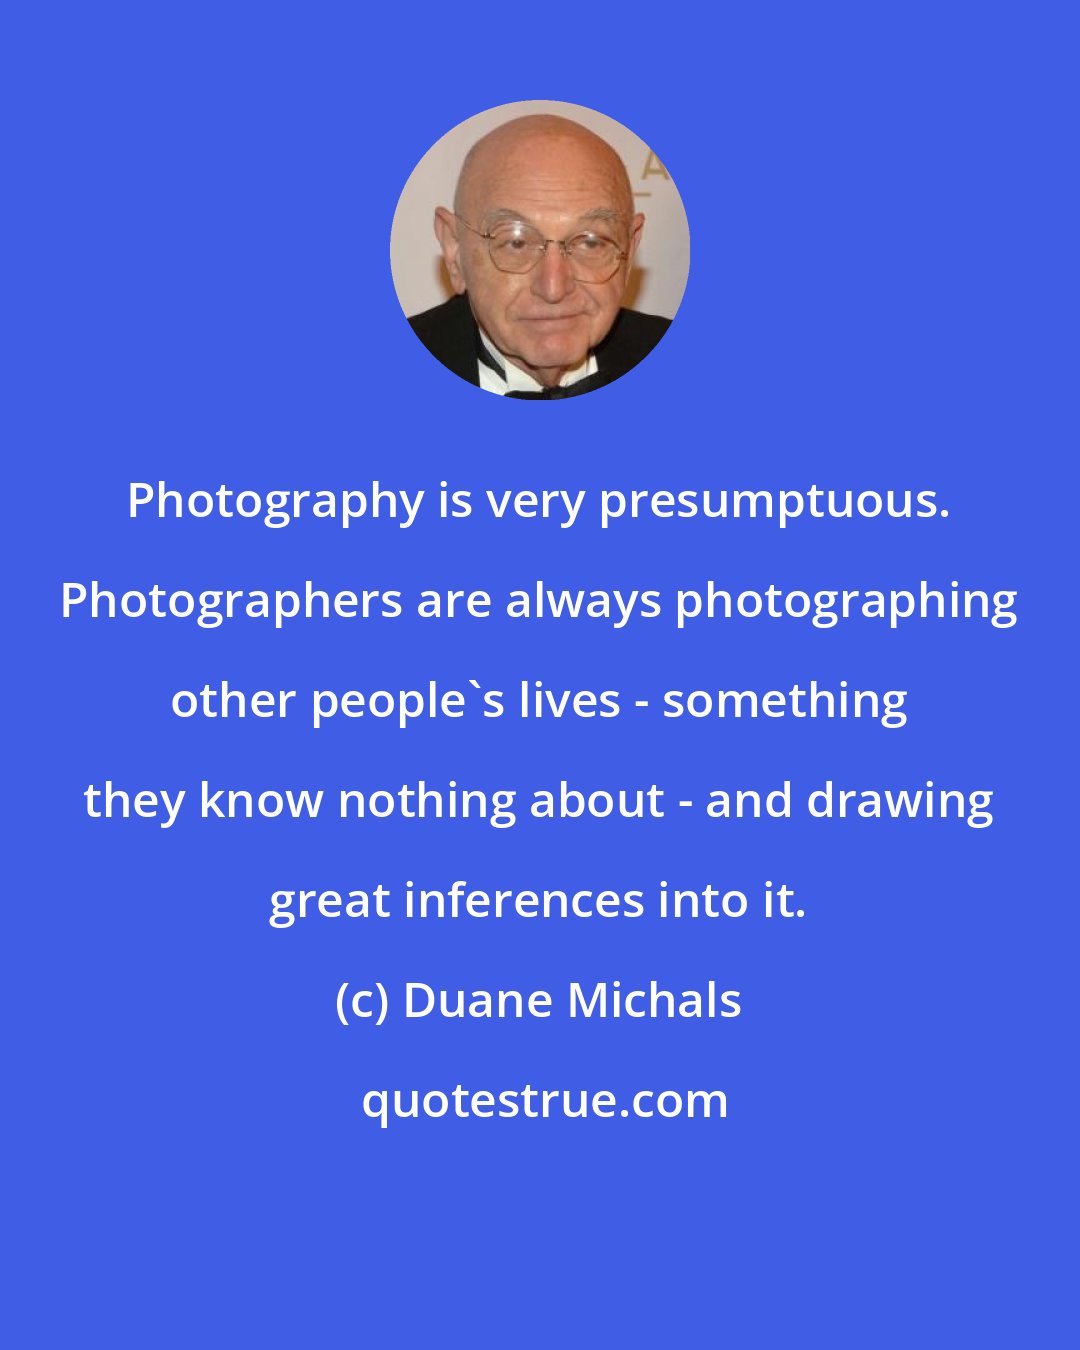 Duane Michals: Photography is very presumptuous. Photographers are always photographing other people's lives - something they know nothing about - and drawing great inferences into it.